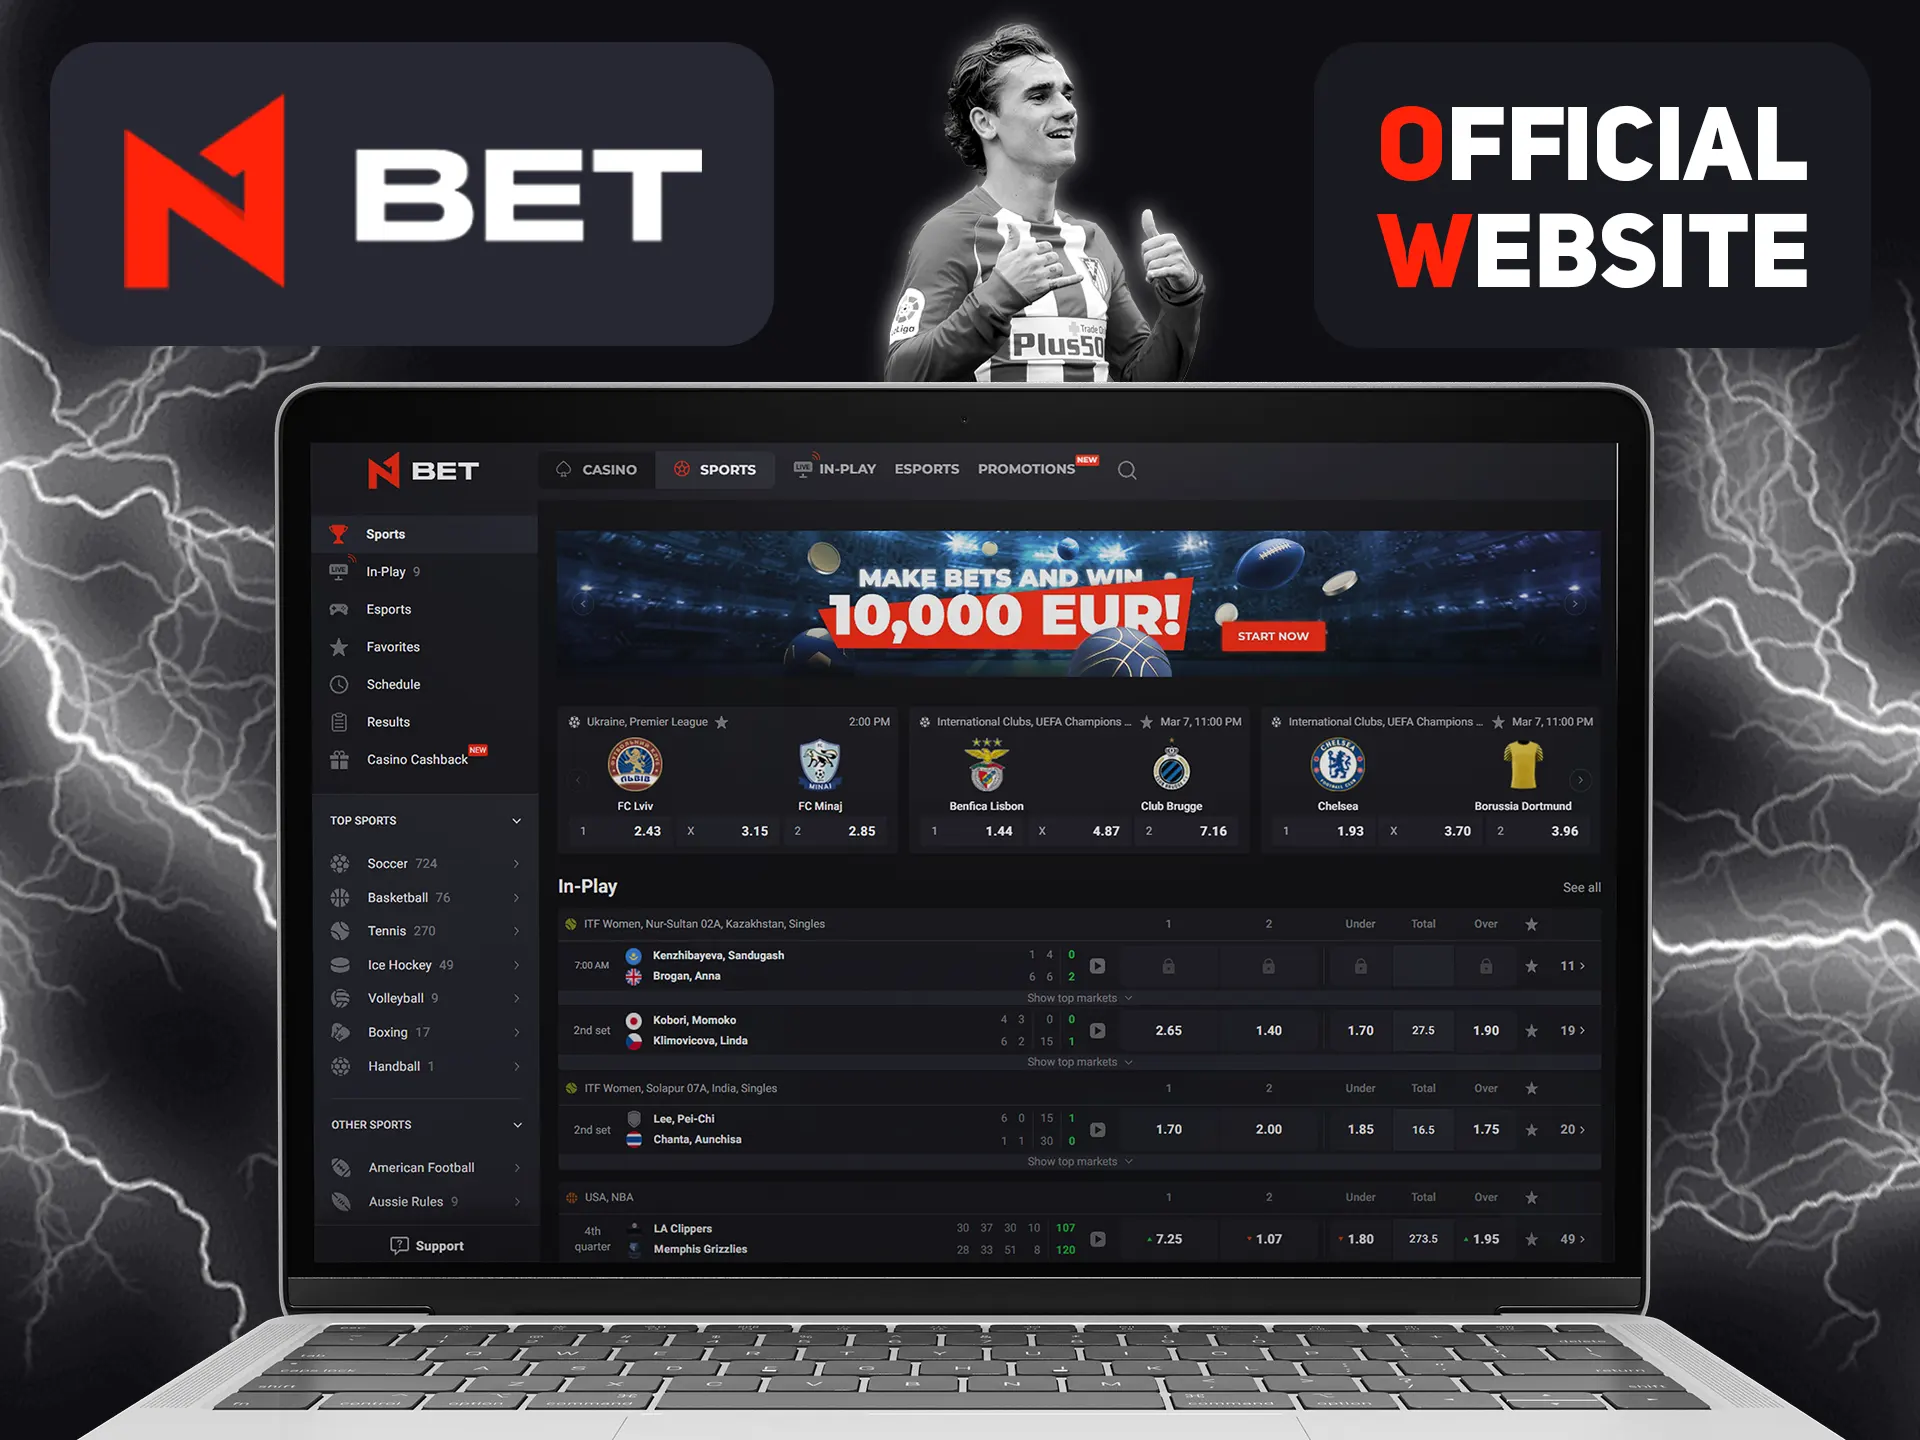 Use all of the N1bet functions on main page.